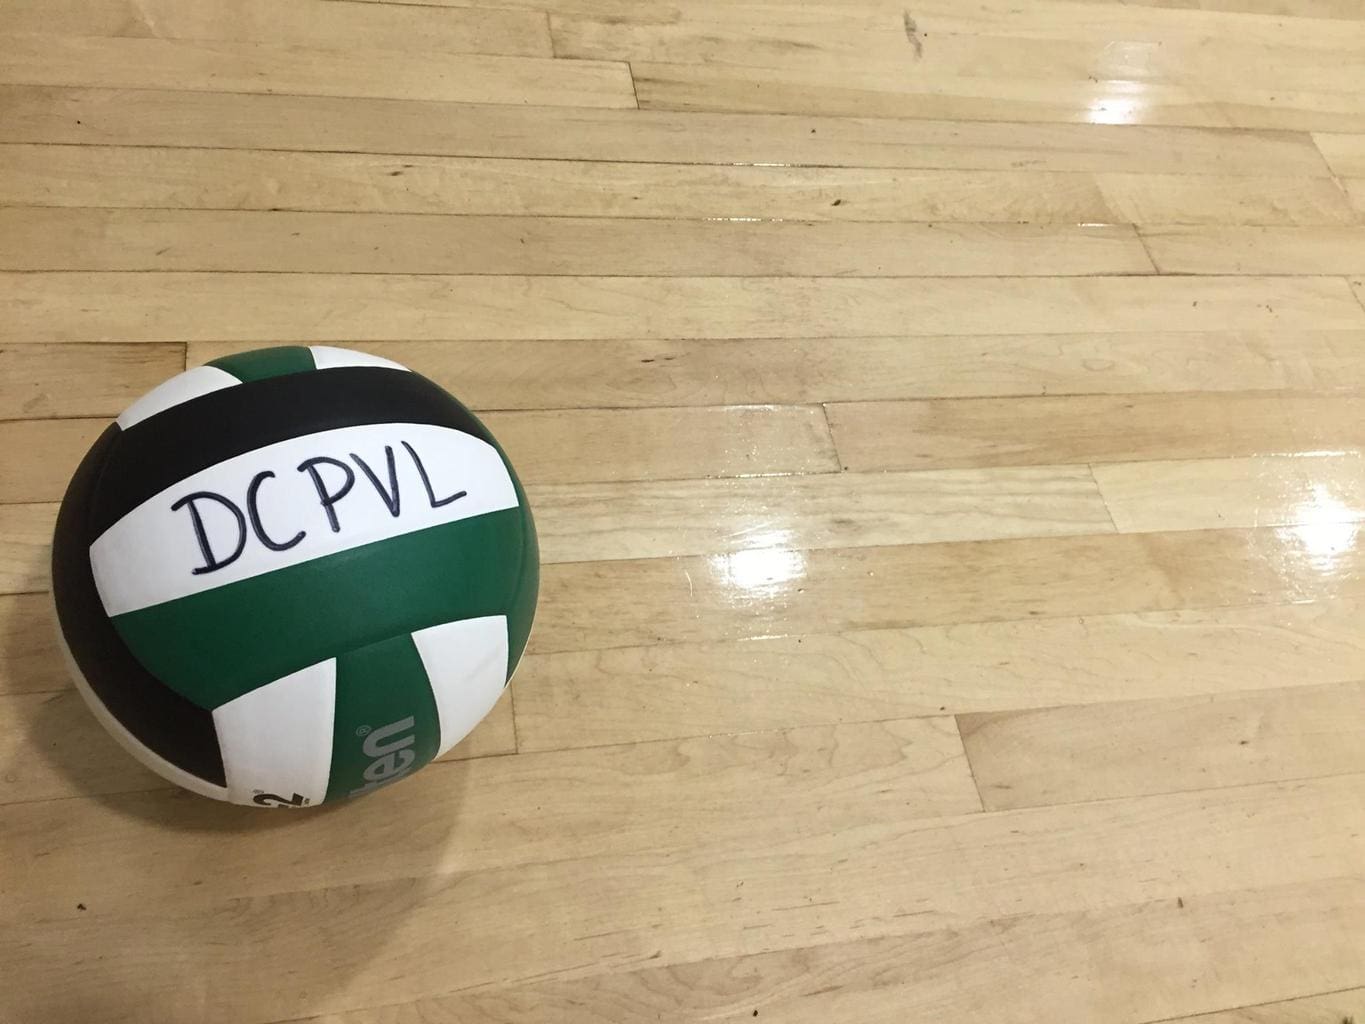 DC Pride Volleyball